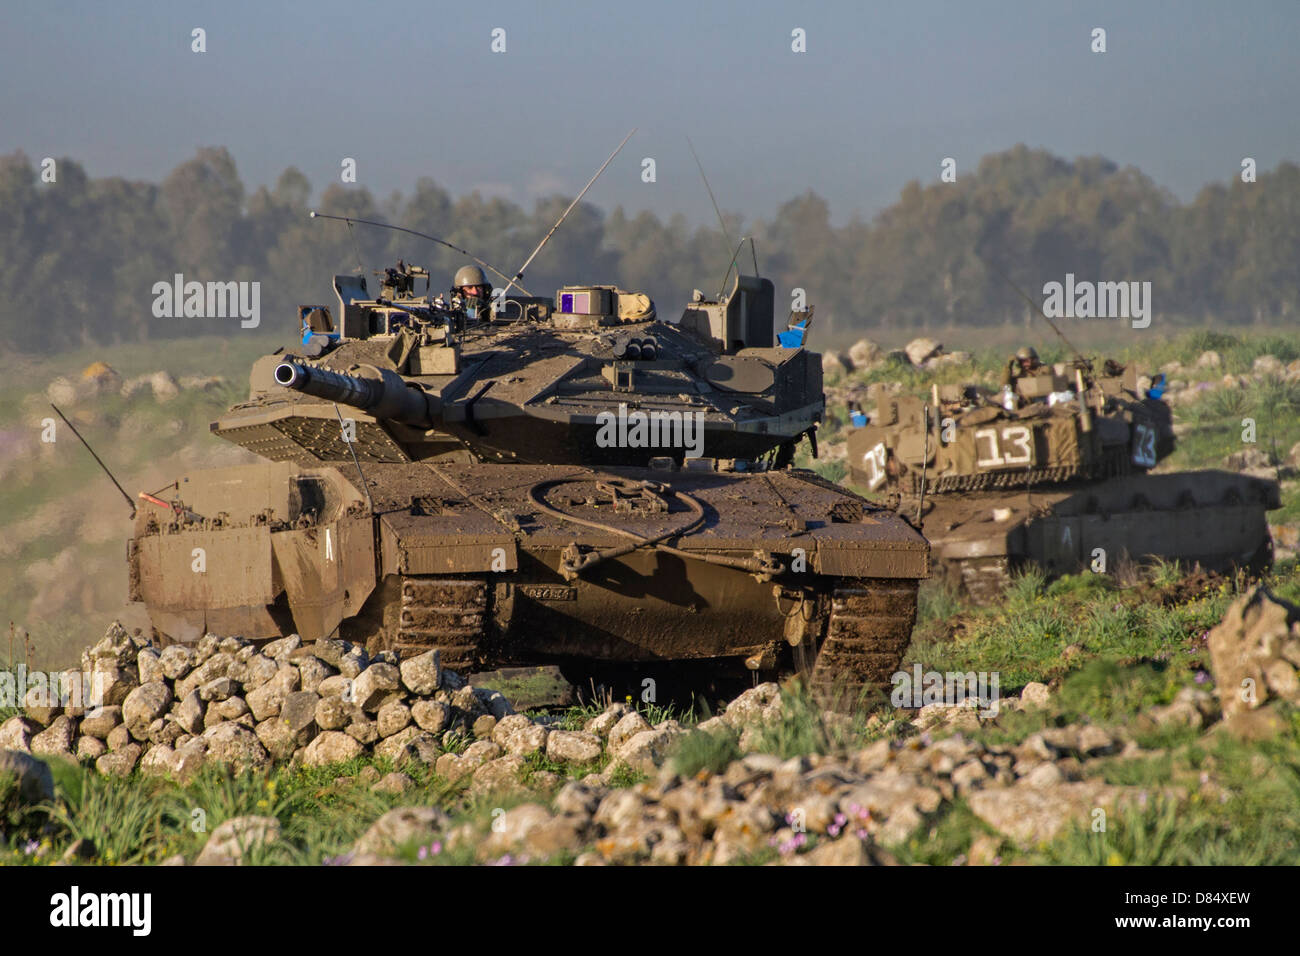 Two Israel Defense Force Merkava Mark IV main battle tanks during an exercise in the Golan Heights. Stock Photo